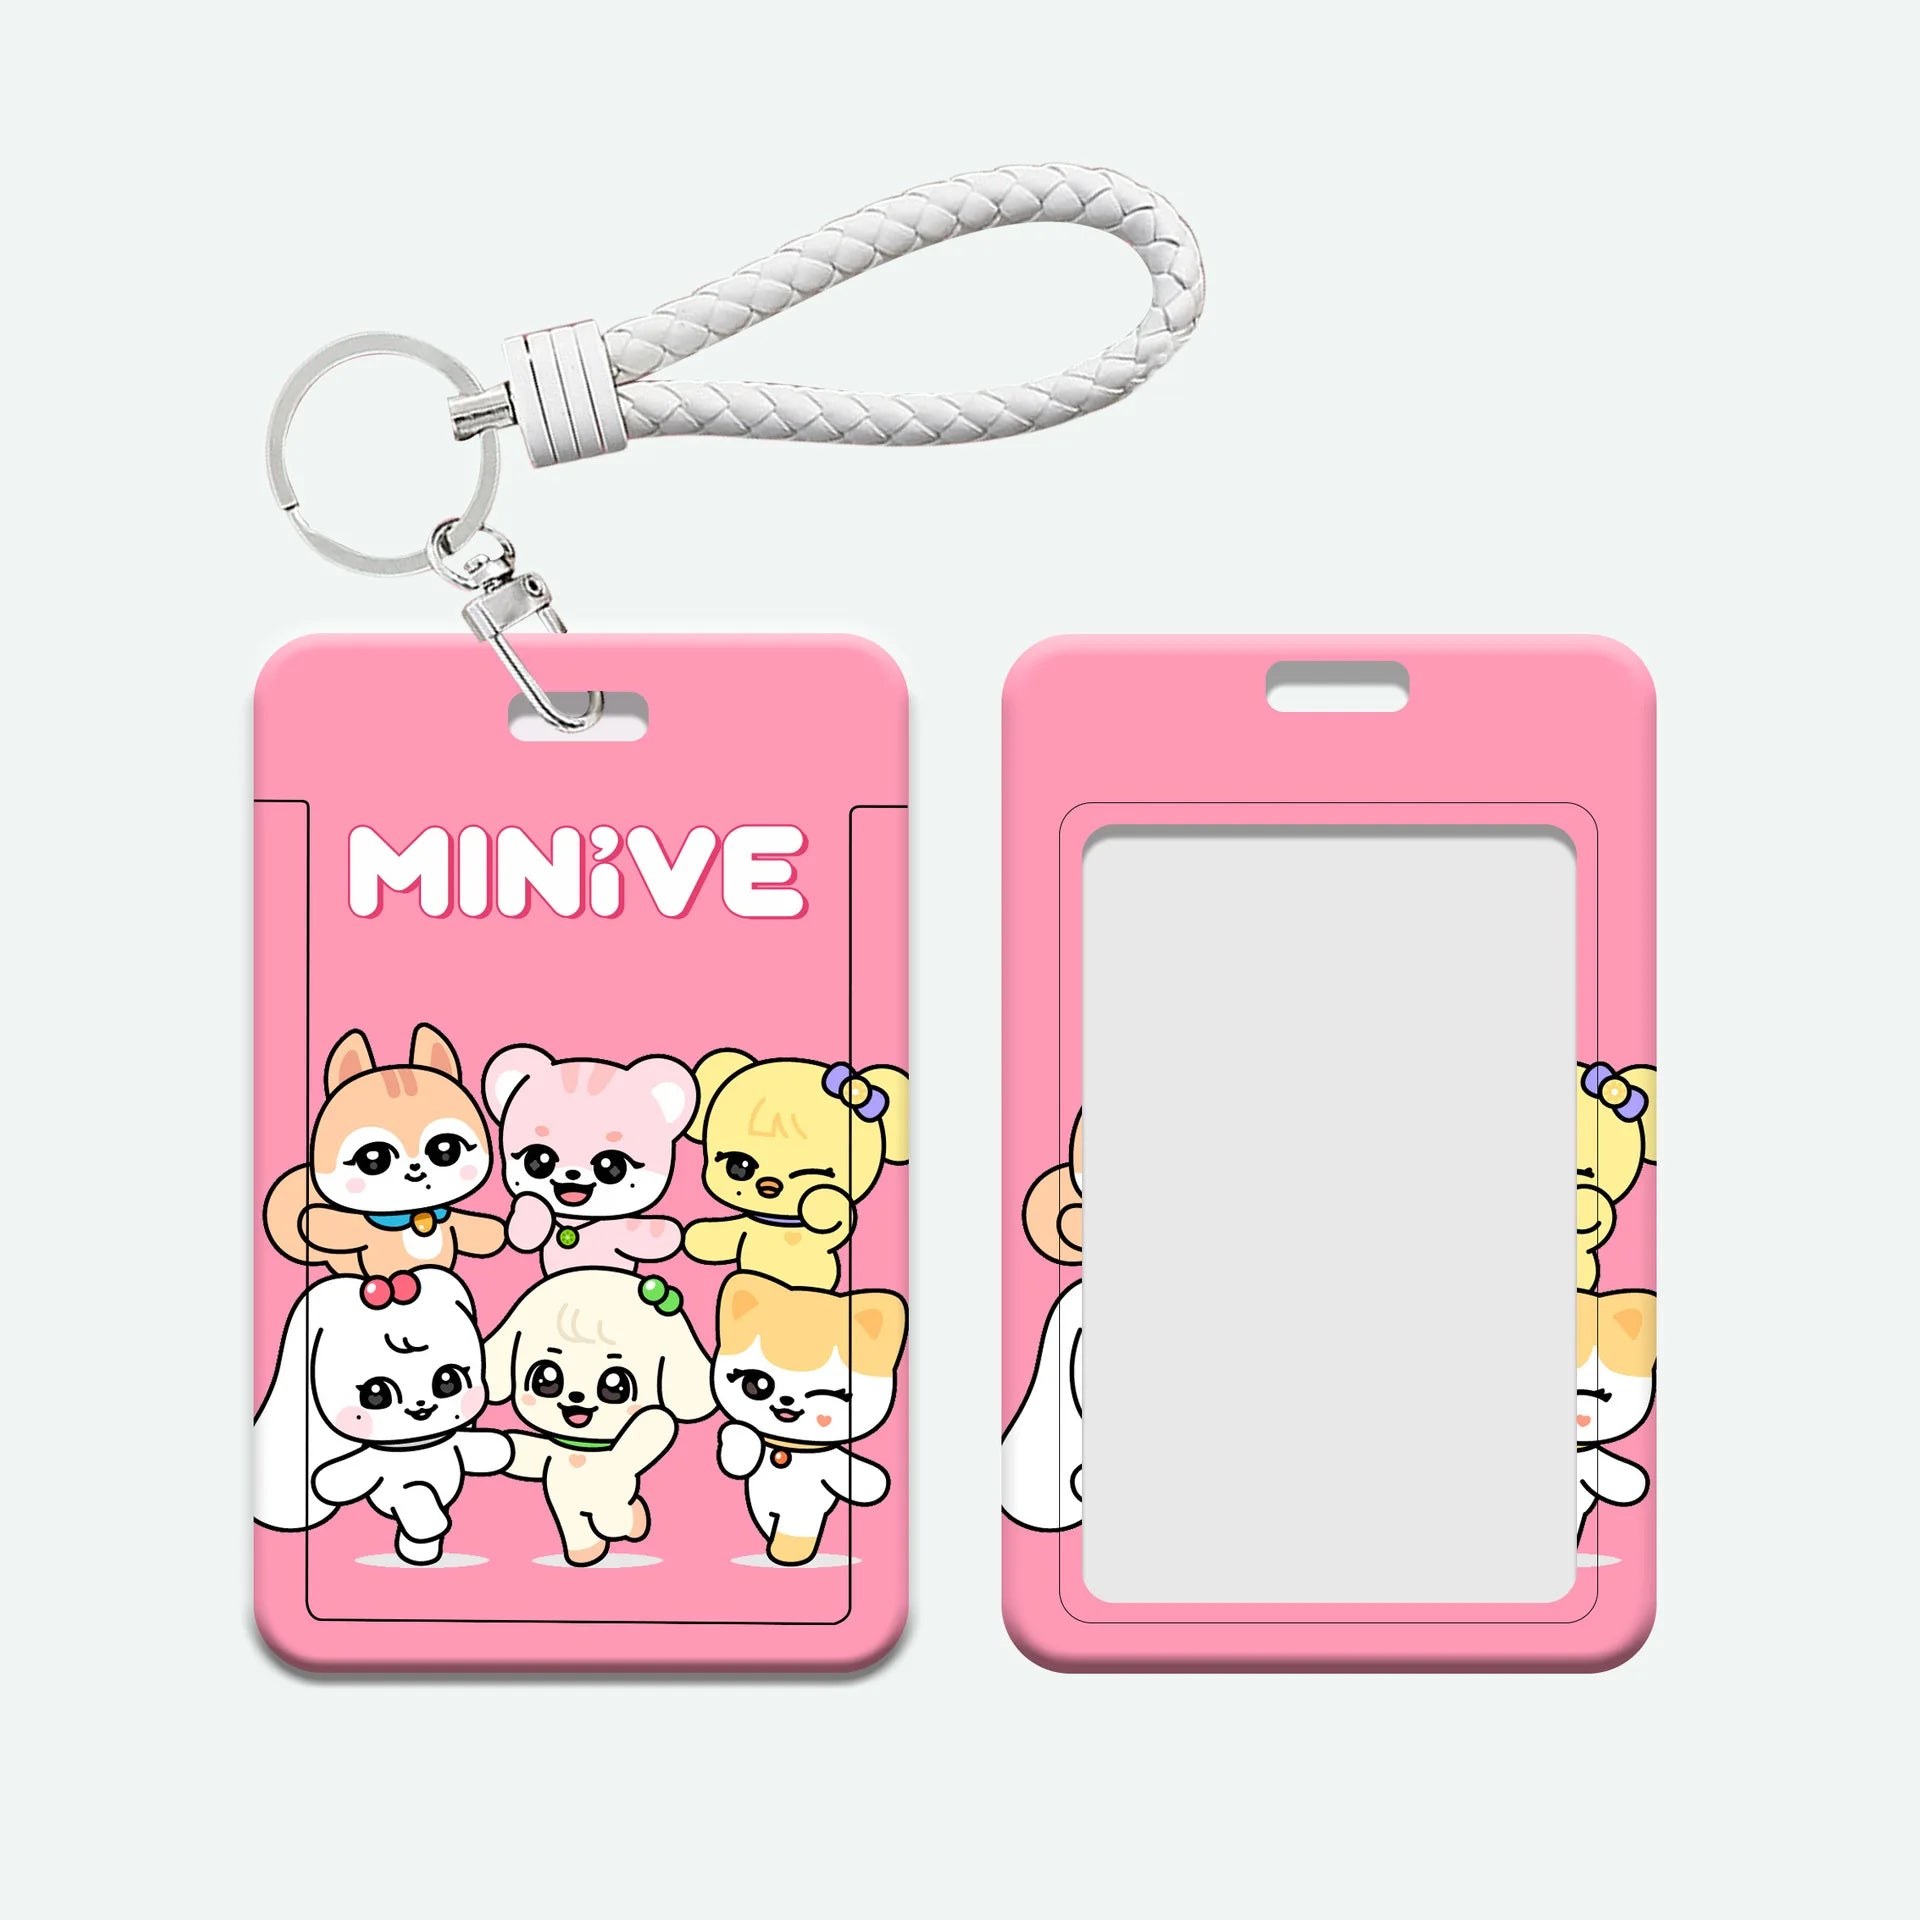 IVE MINIVE Bus Card Holder